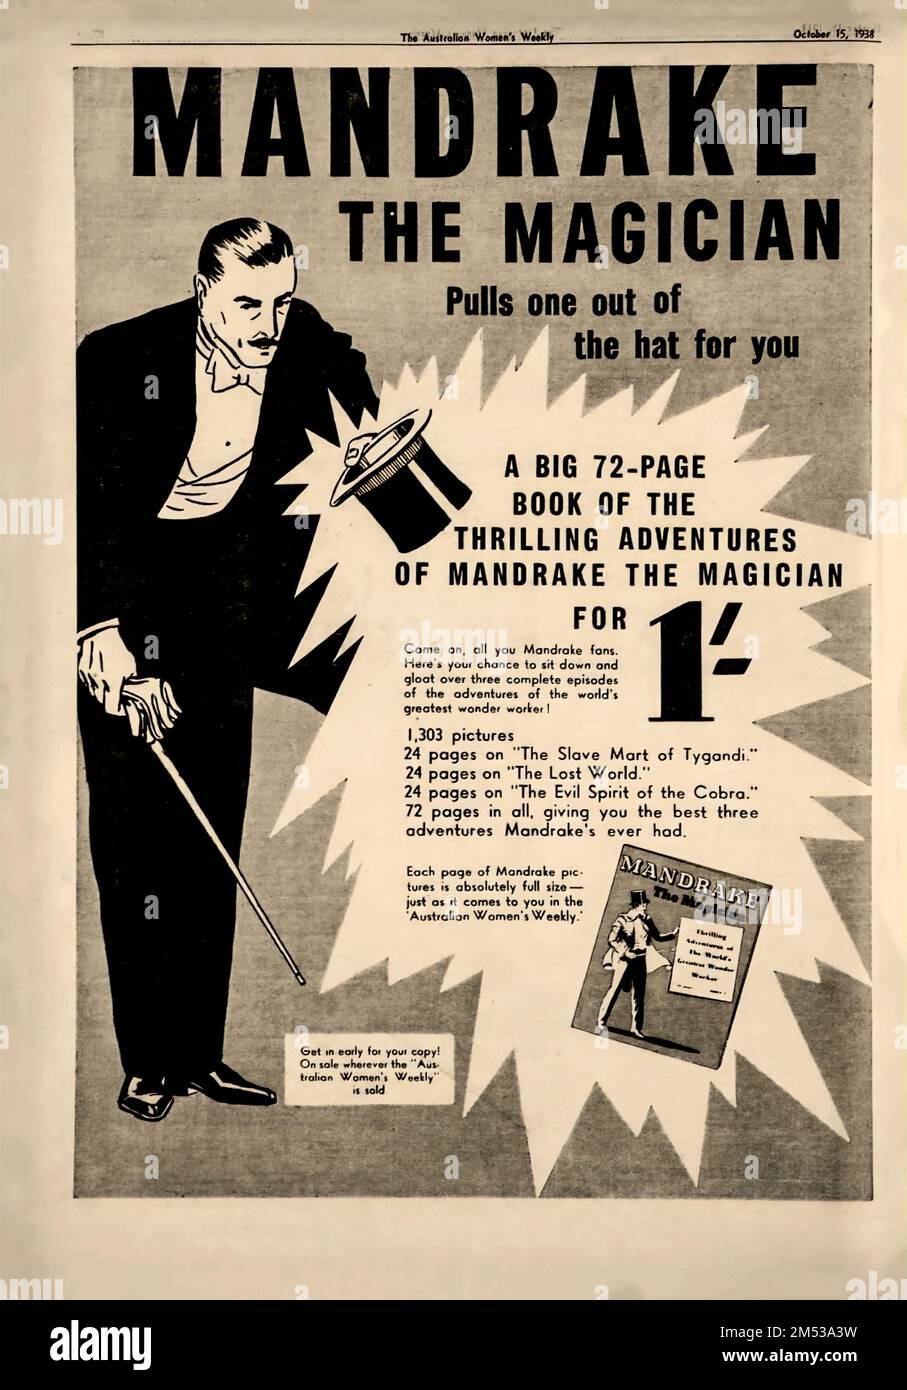 1938 advertisement for Mandrake the Magician from the Australian Women's weekly. The celebrated american magician LEON MANDRAKE (born Leon Giglio, 1911-1993 ), was an Italian-American magician, mentalist, illusionist, escapologist, ventriloquist and stunt performer known worldwide as Mandrake the Magician. Stock Photo